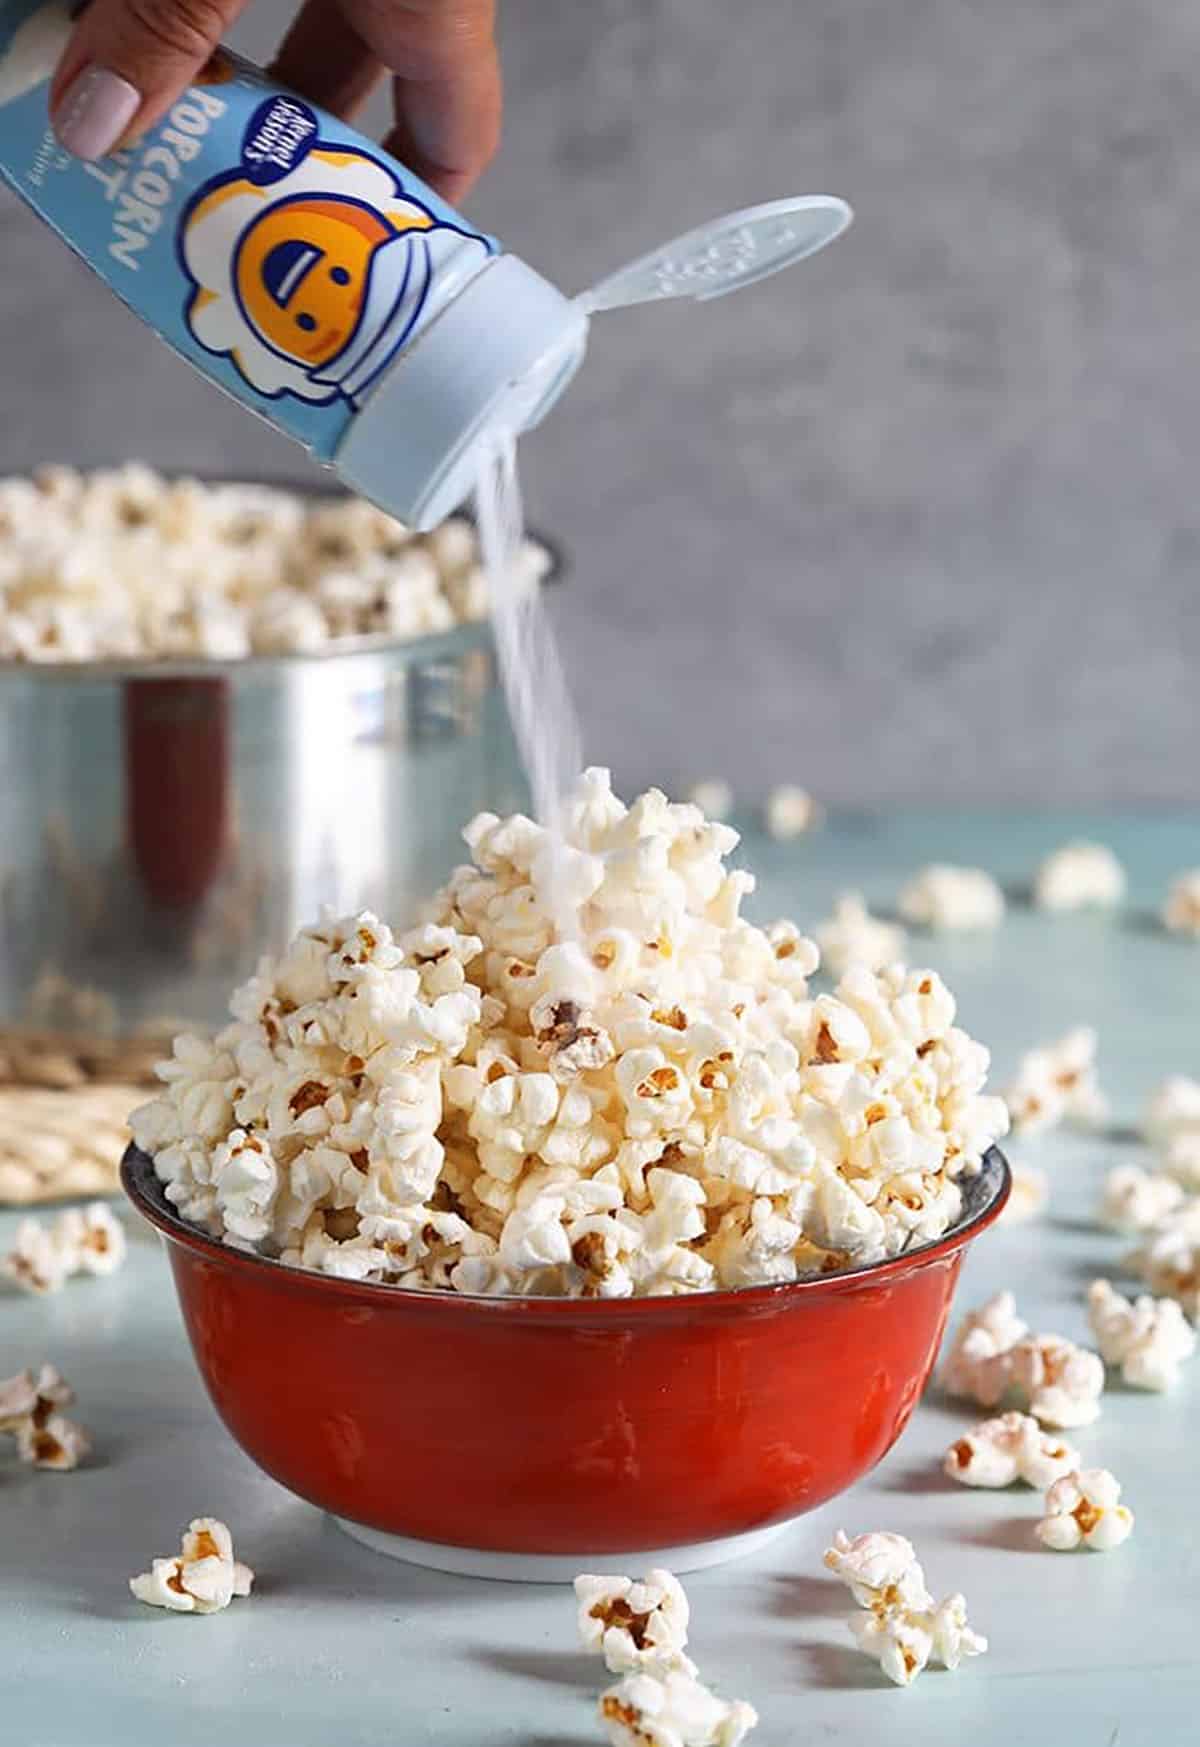 Popcorn in a red bowl with popcorn salt being put on top.